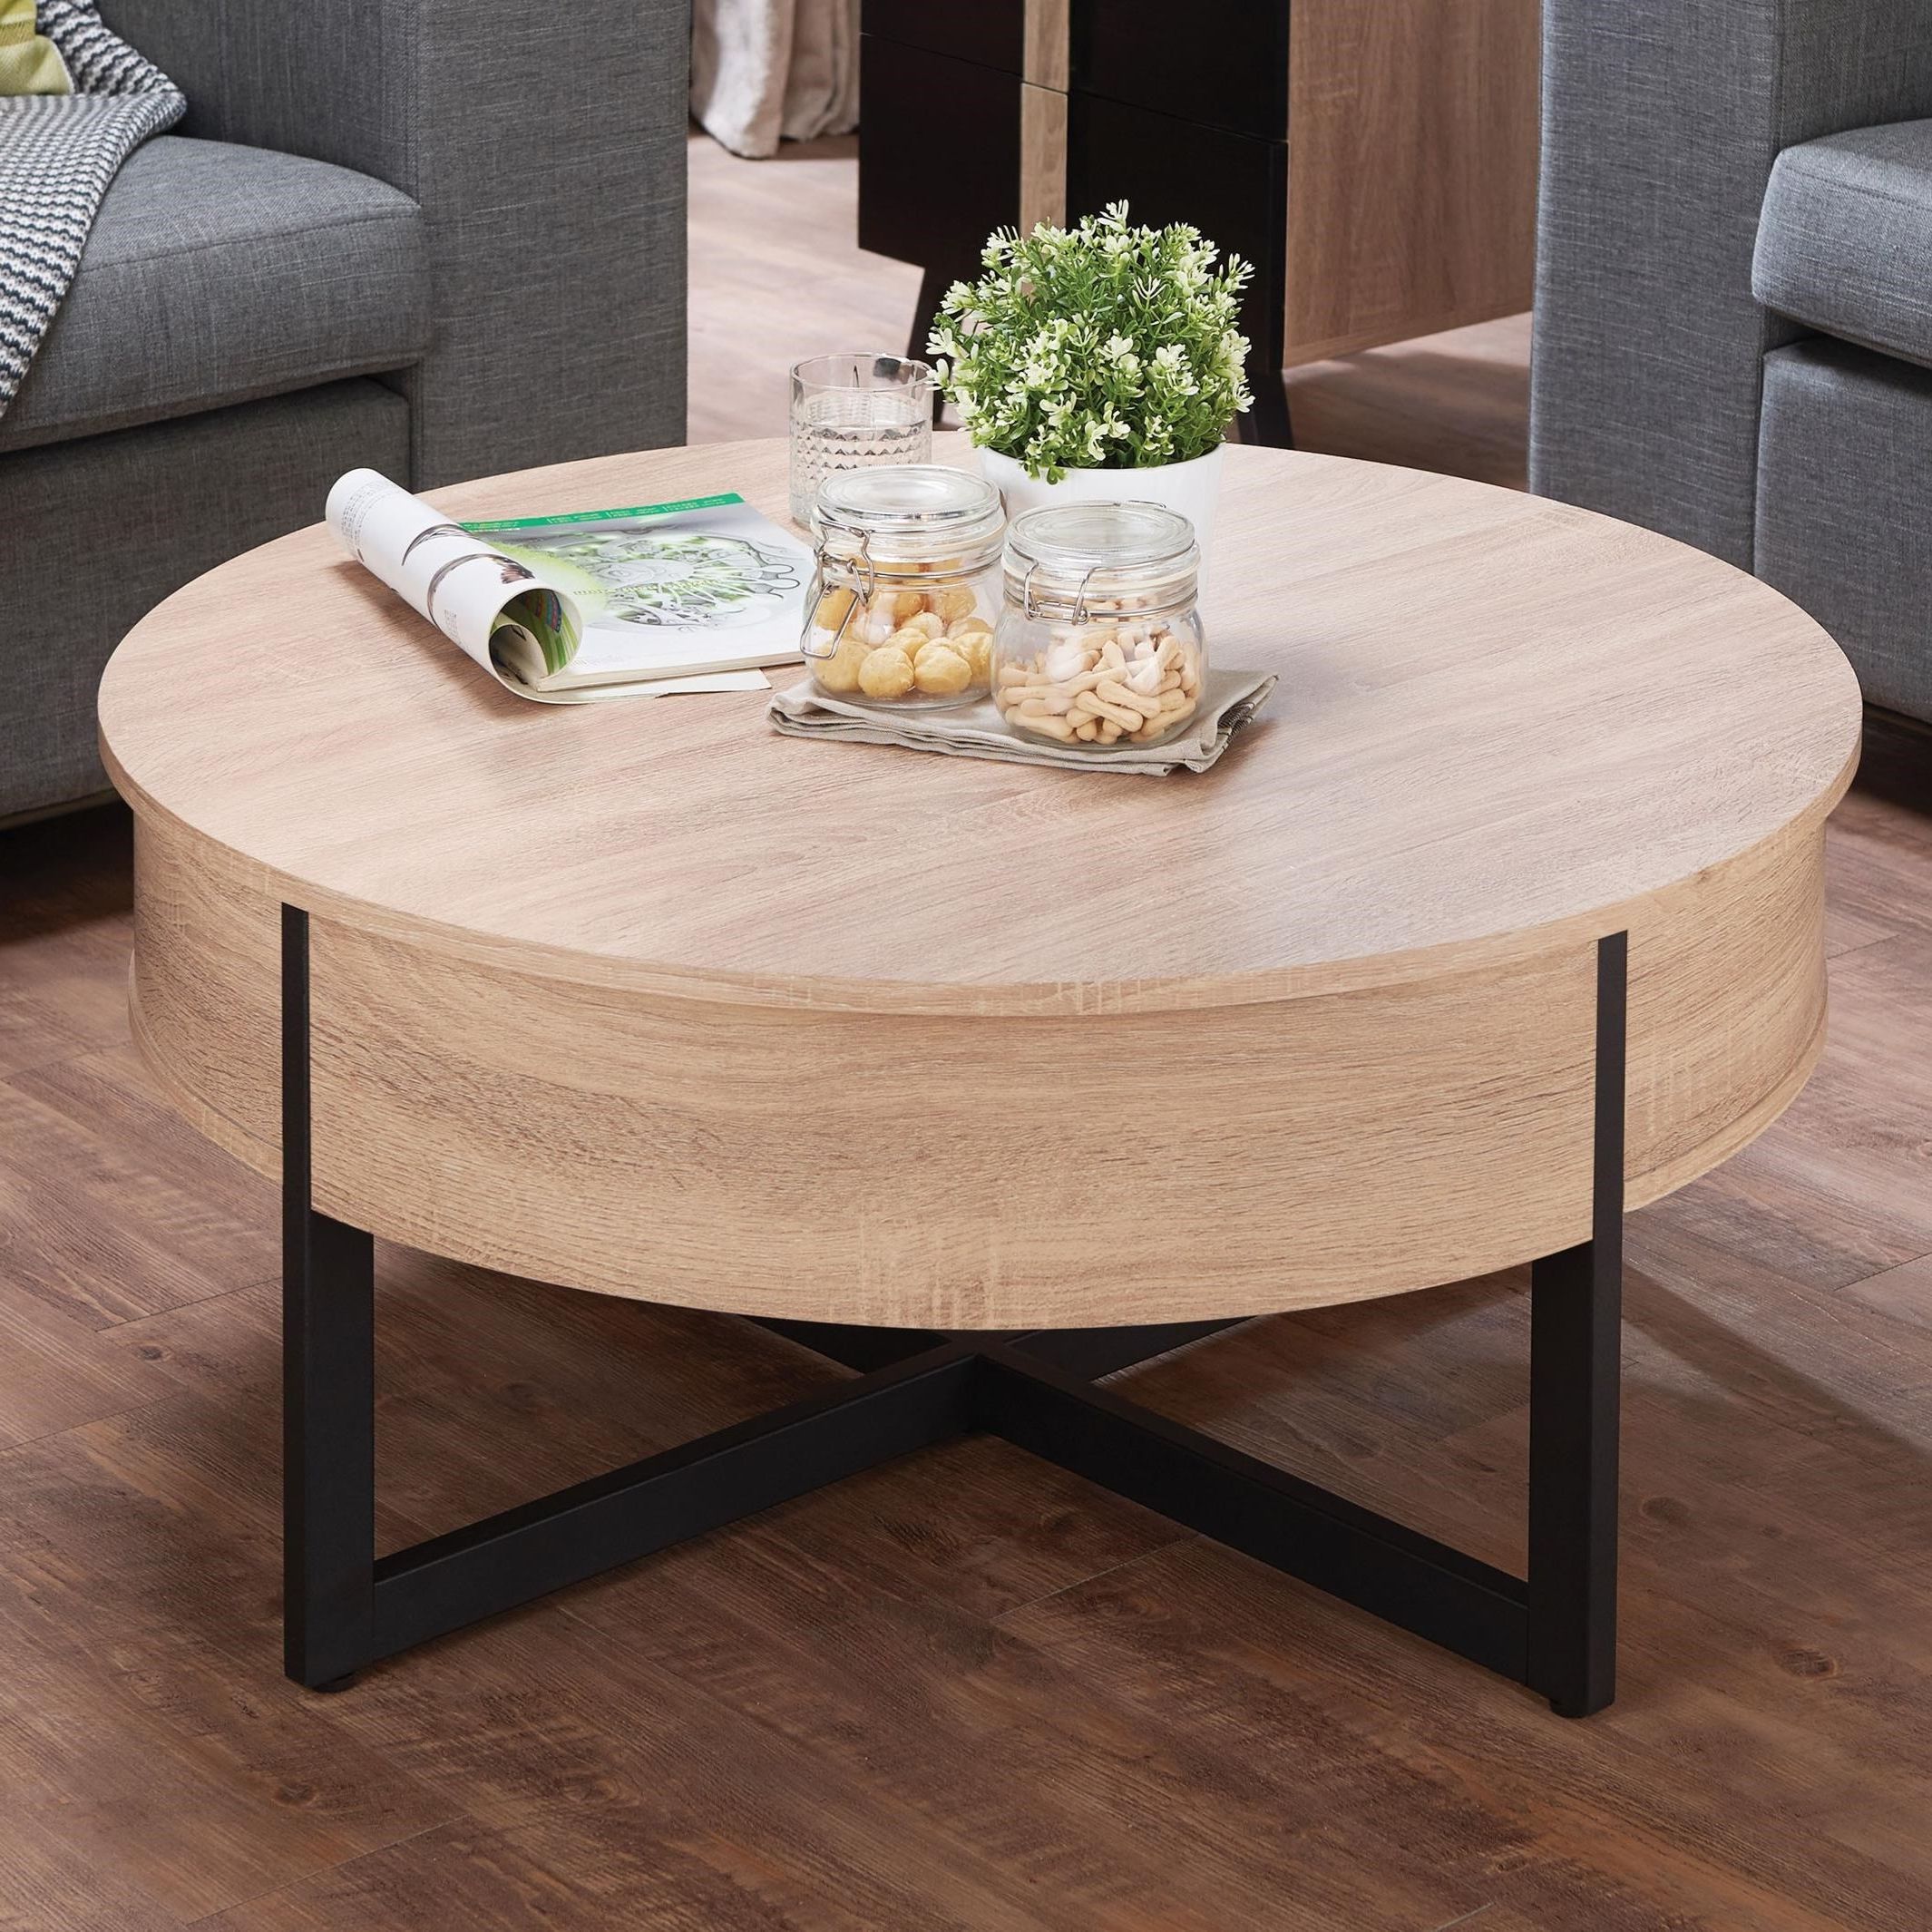 Widely Used Round Coffee Tables With Storage For Corner Coffee Table With Storage – Amalina (View 11 of 15)